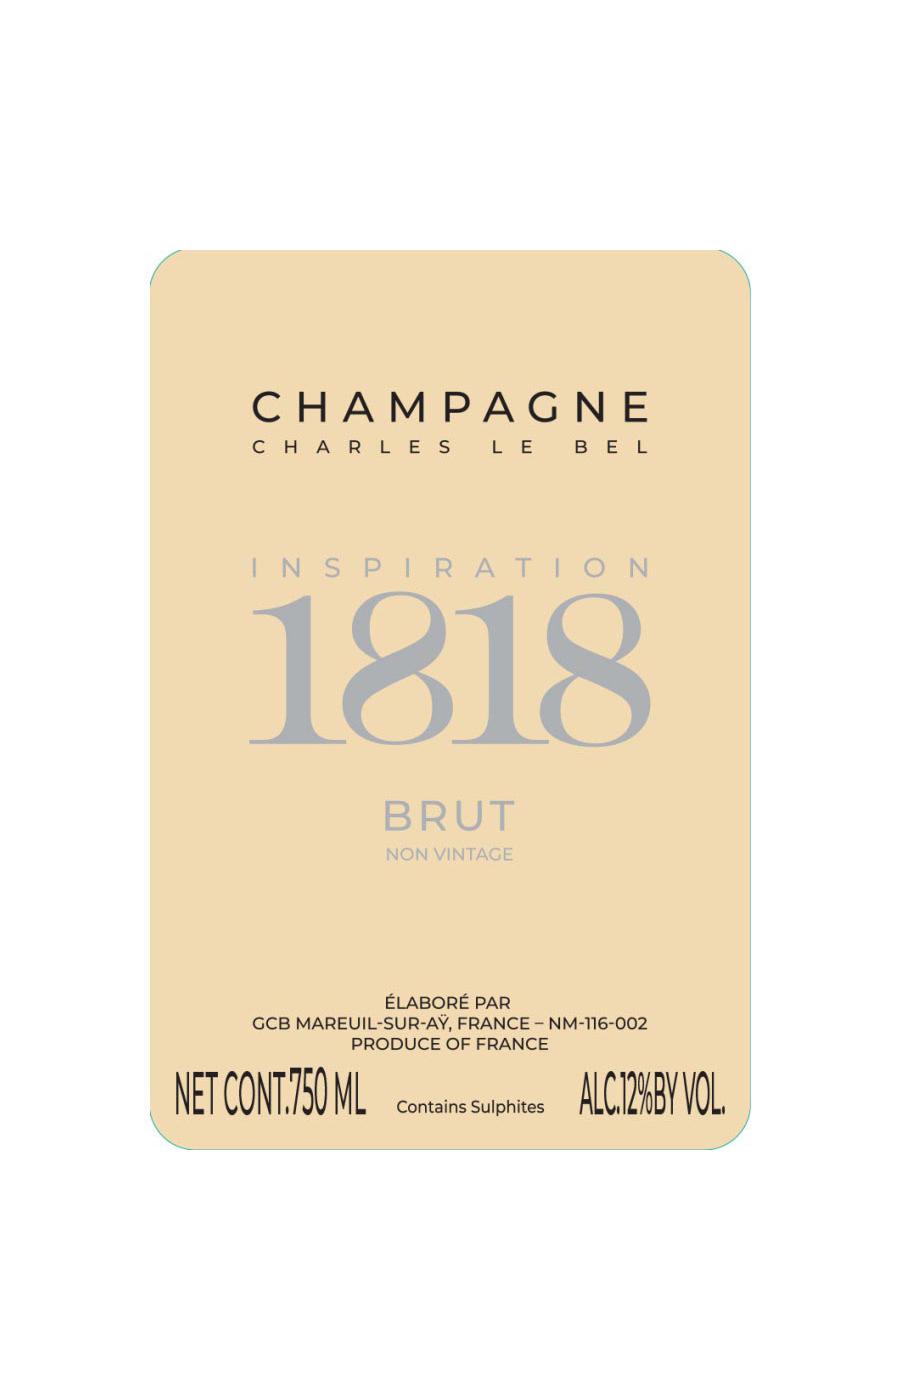 Charles Le Bel 1818 Champagne; image 2 of 2